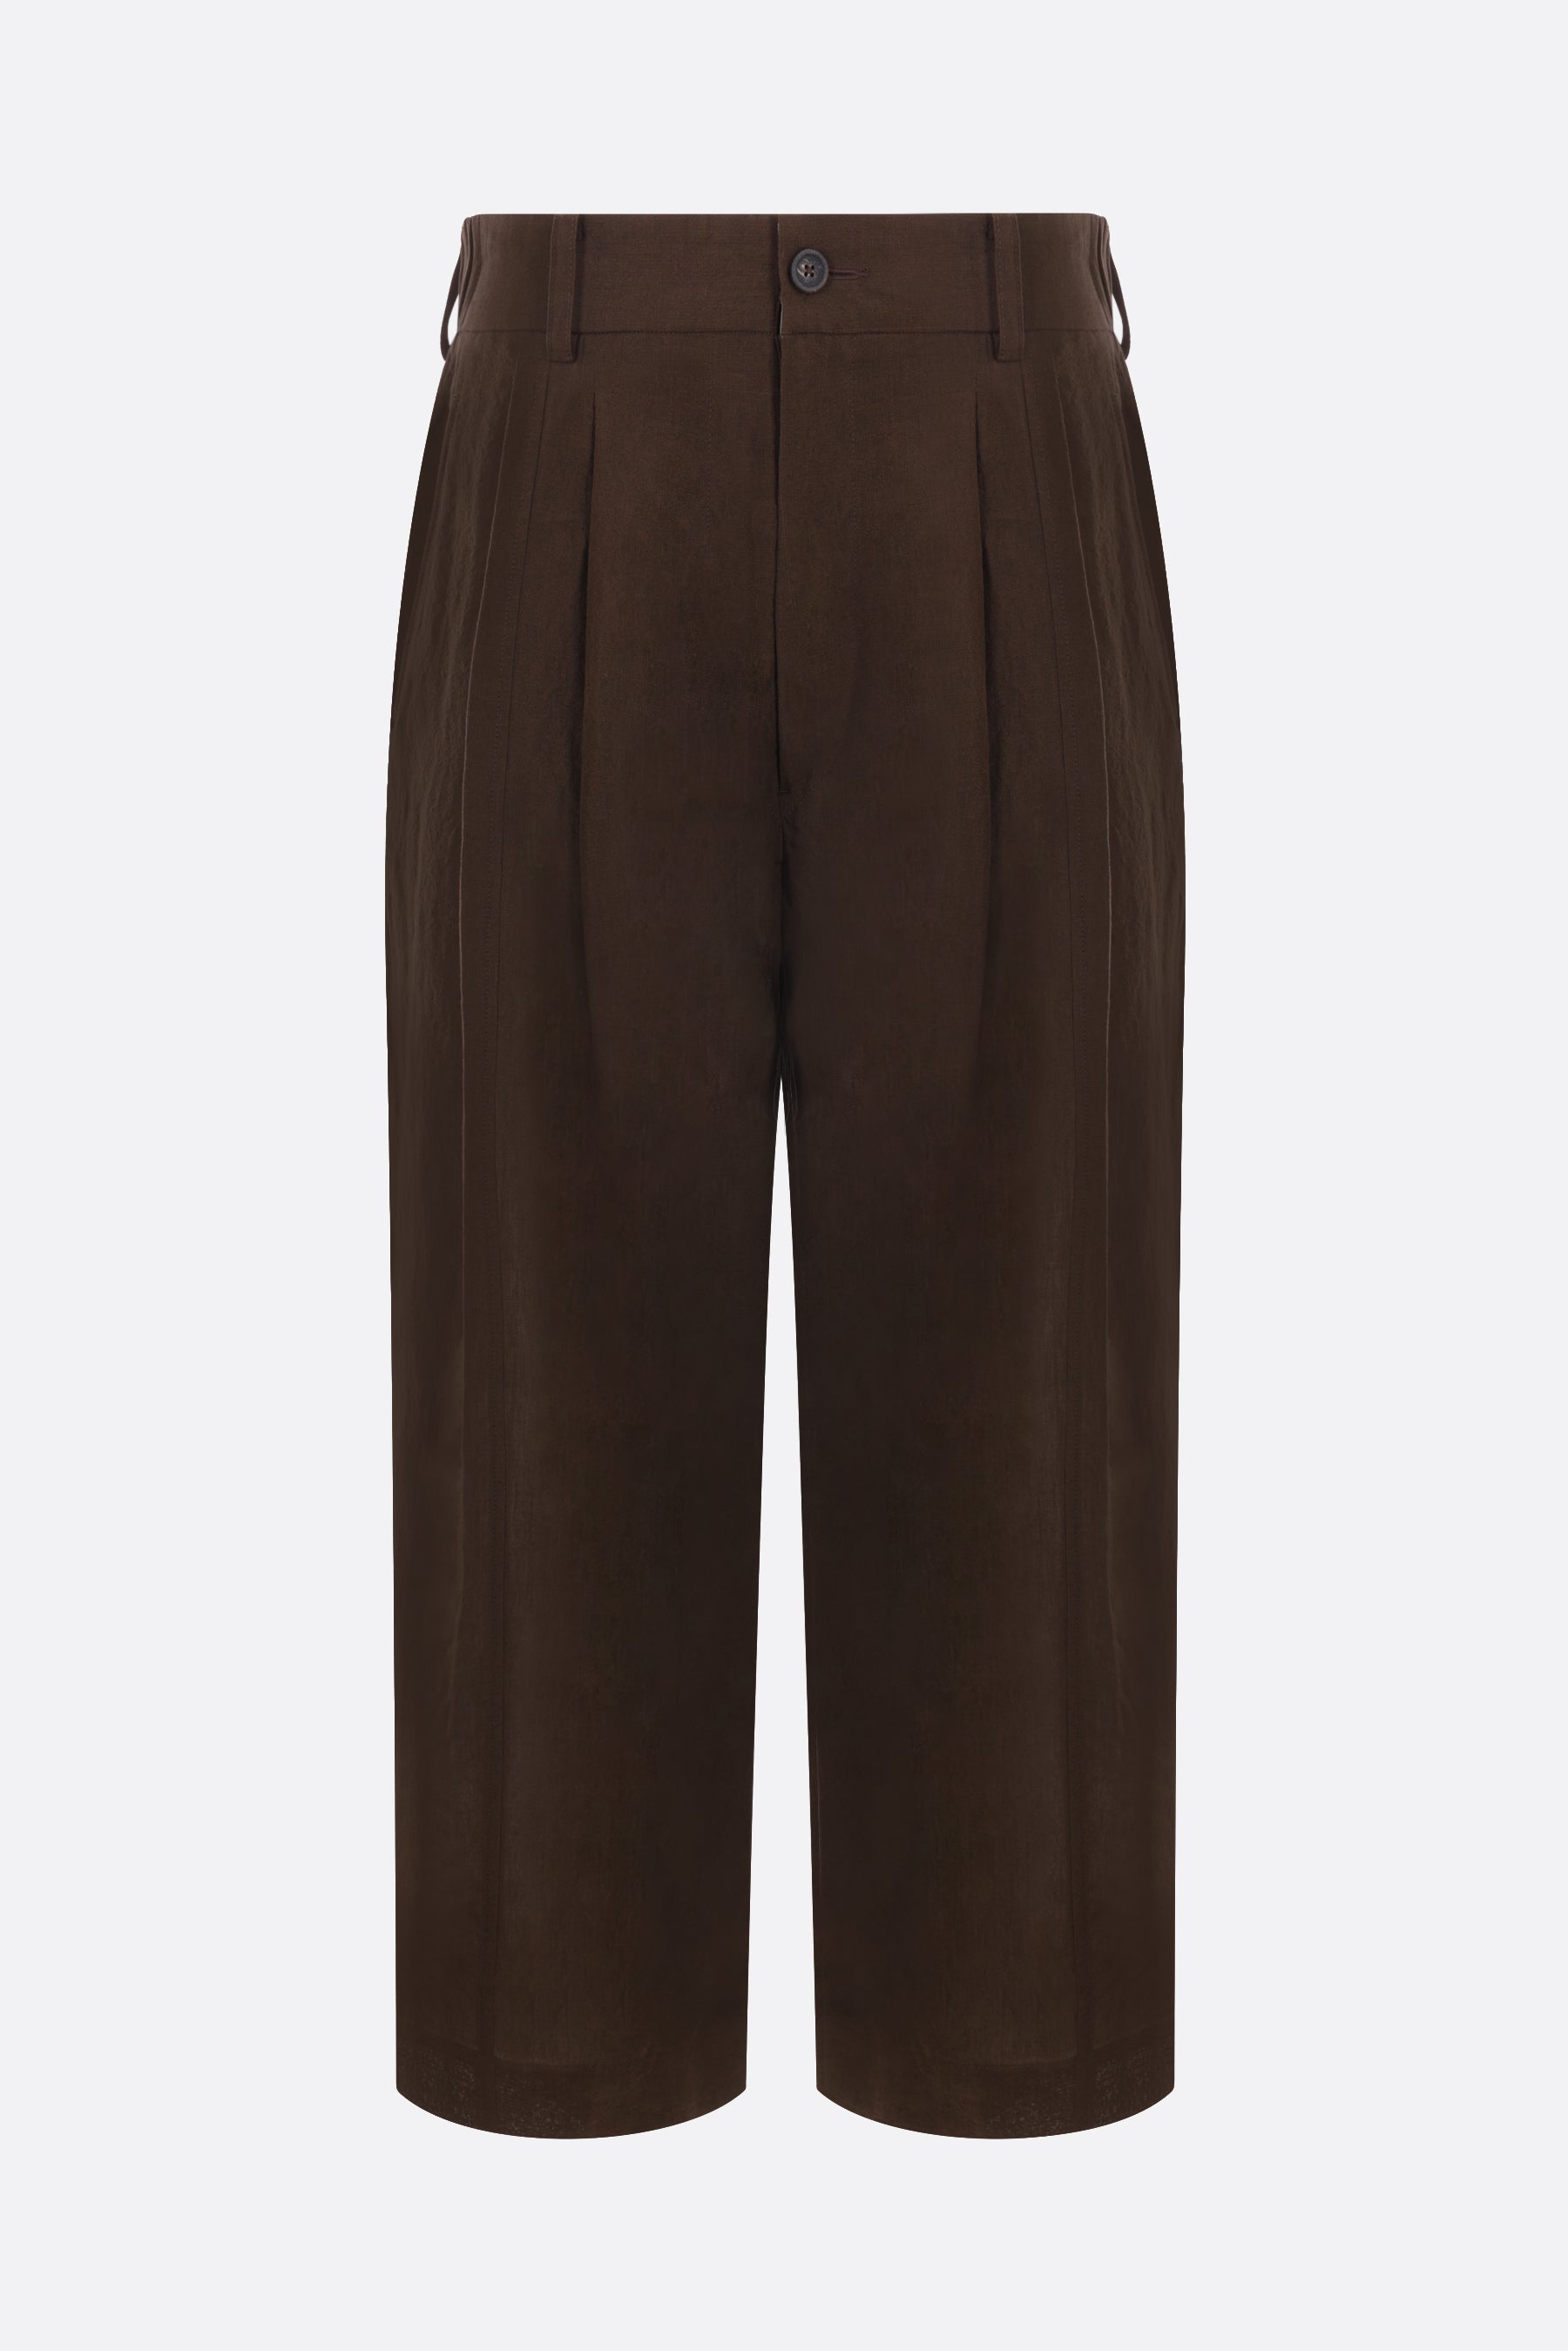 wrinkled linen cropped pants